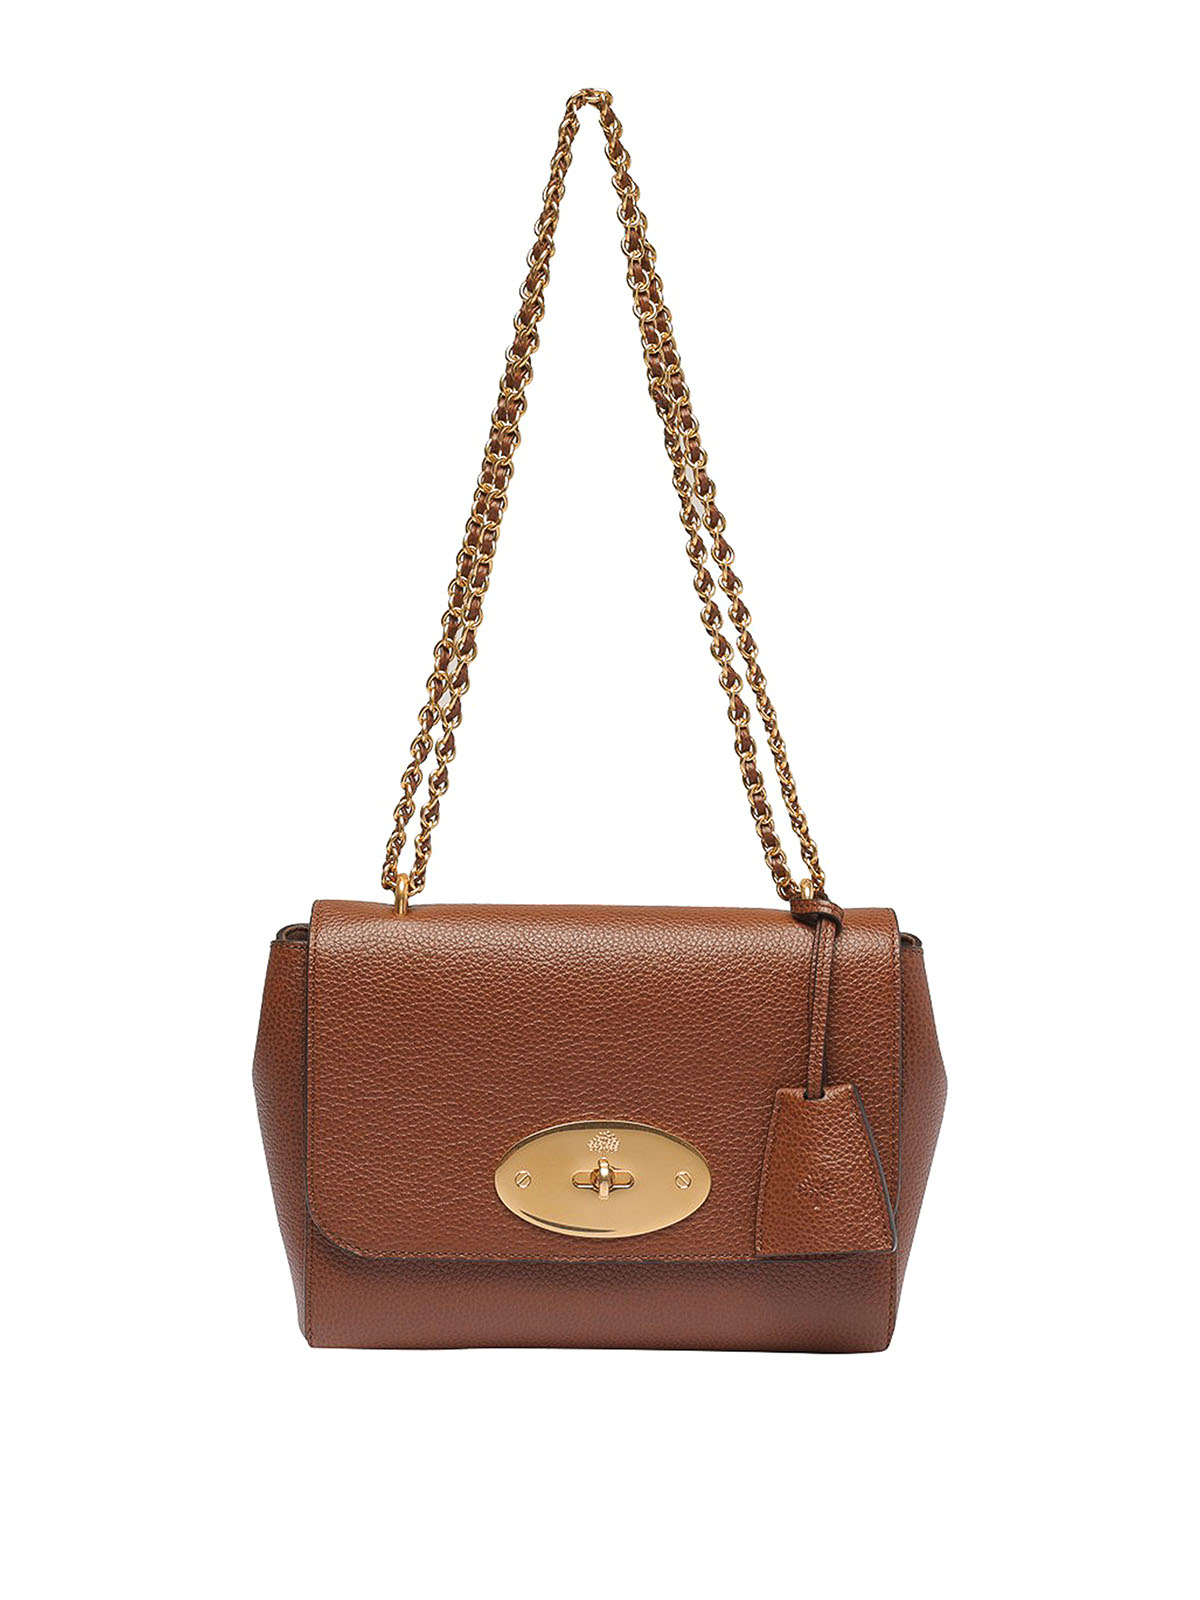 Mulberry Leather Bag With Turn Lock Closure In Brown